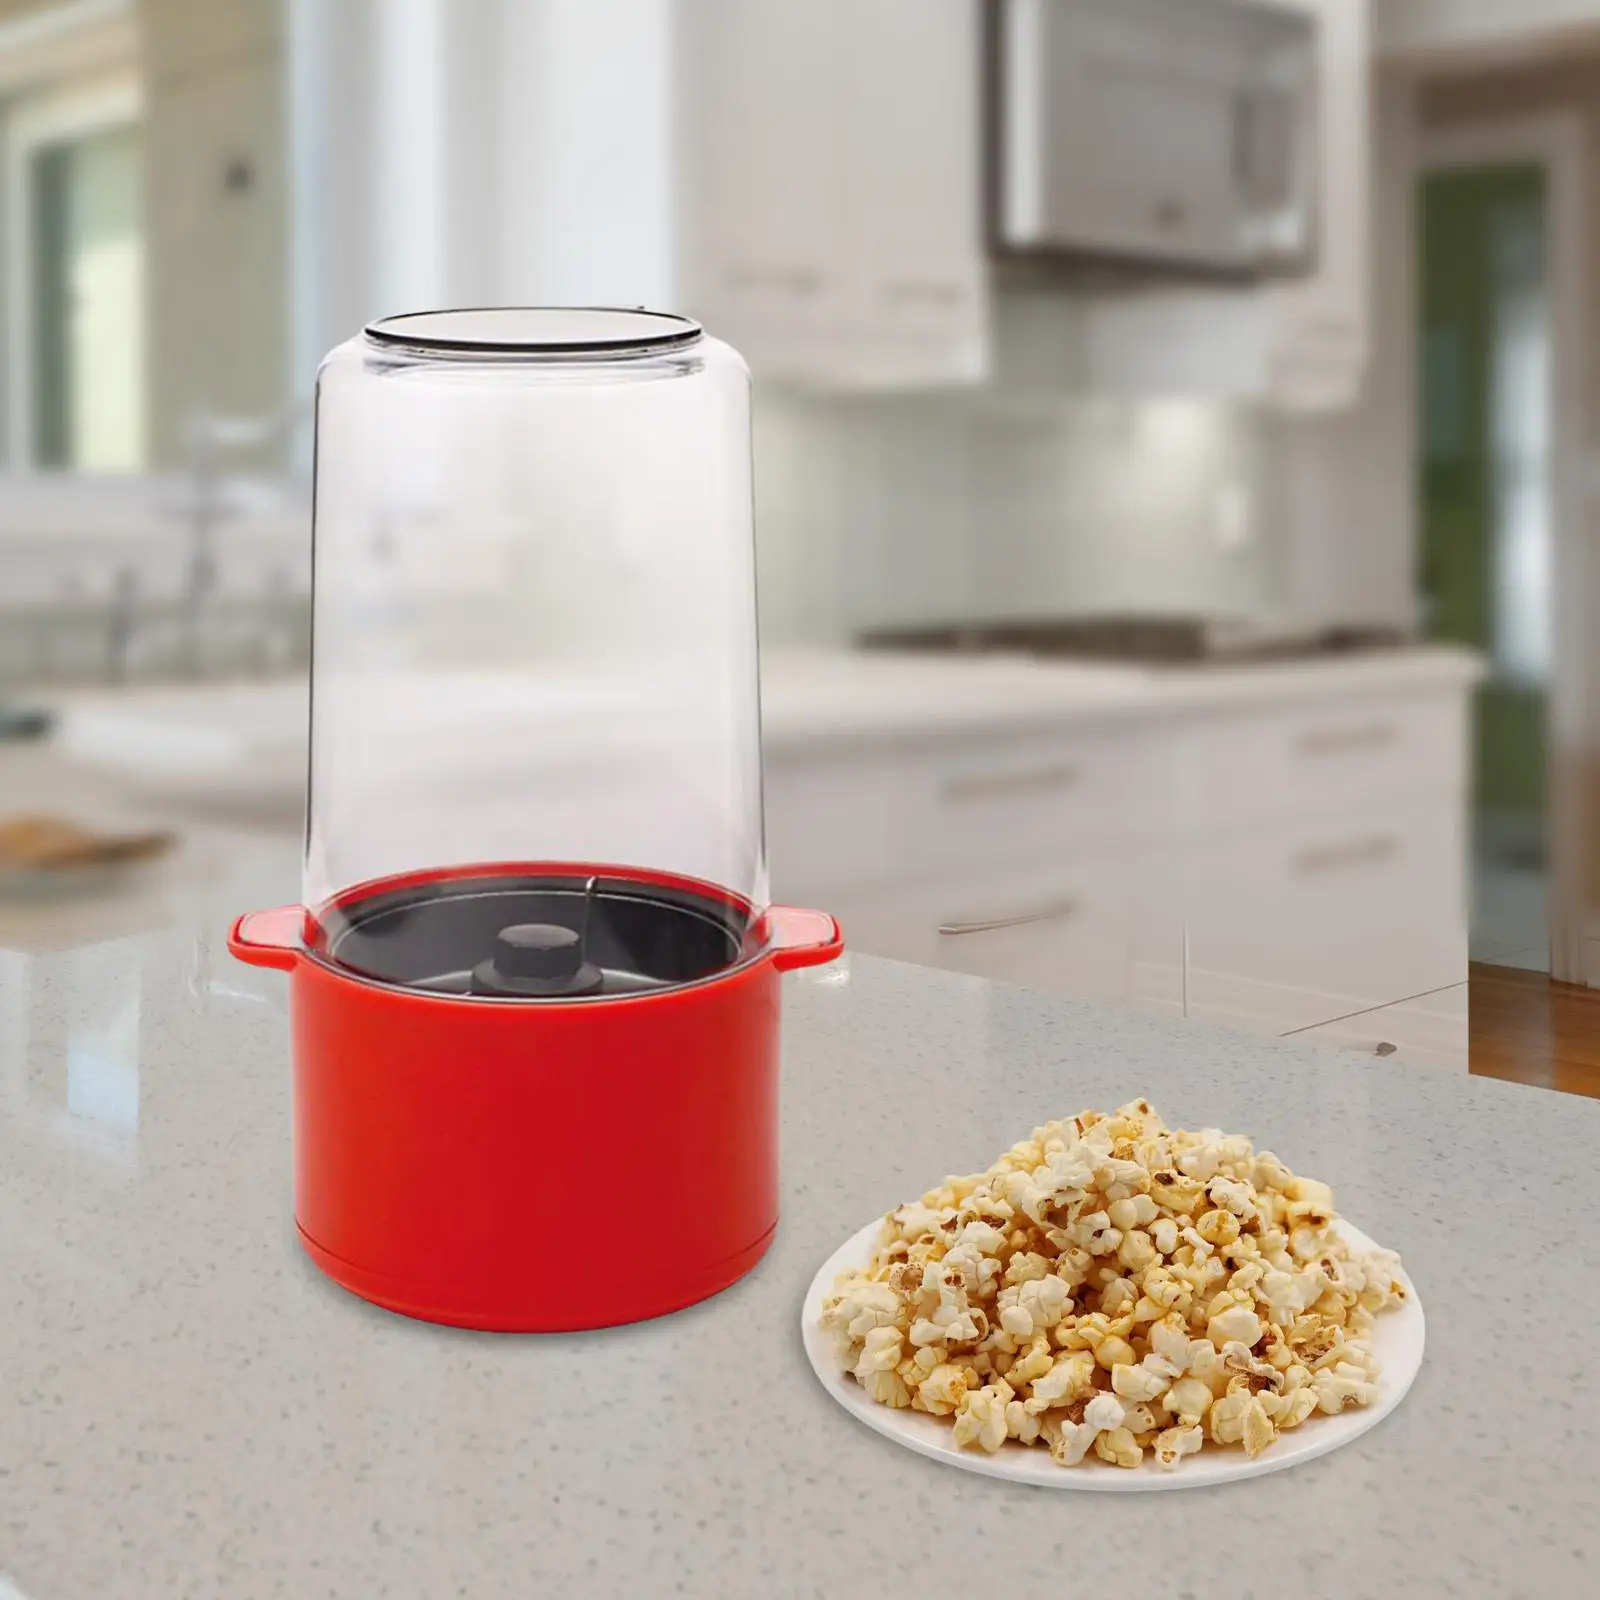 Popcorn Maker Electric Hot Air DIY Household Easy to Operate Popcorn Popper Corns Popper for Kitchen Camping Dorm Party Children